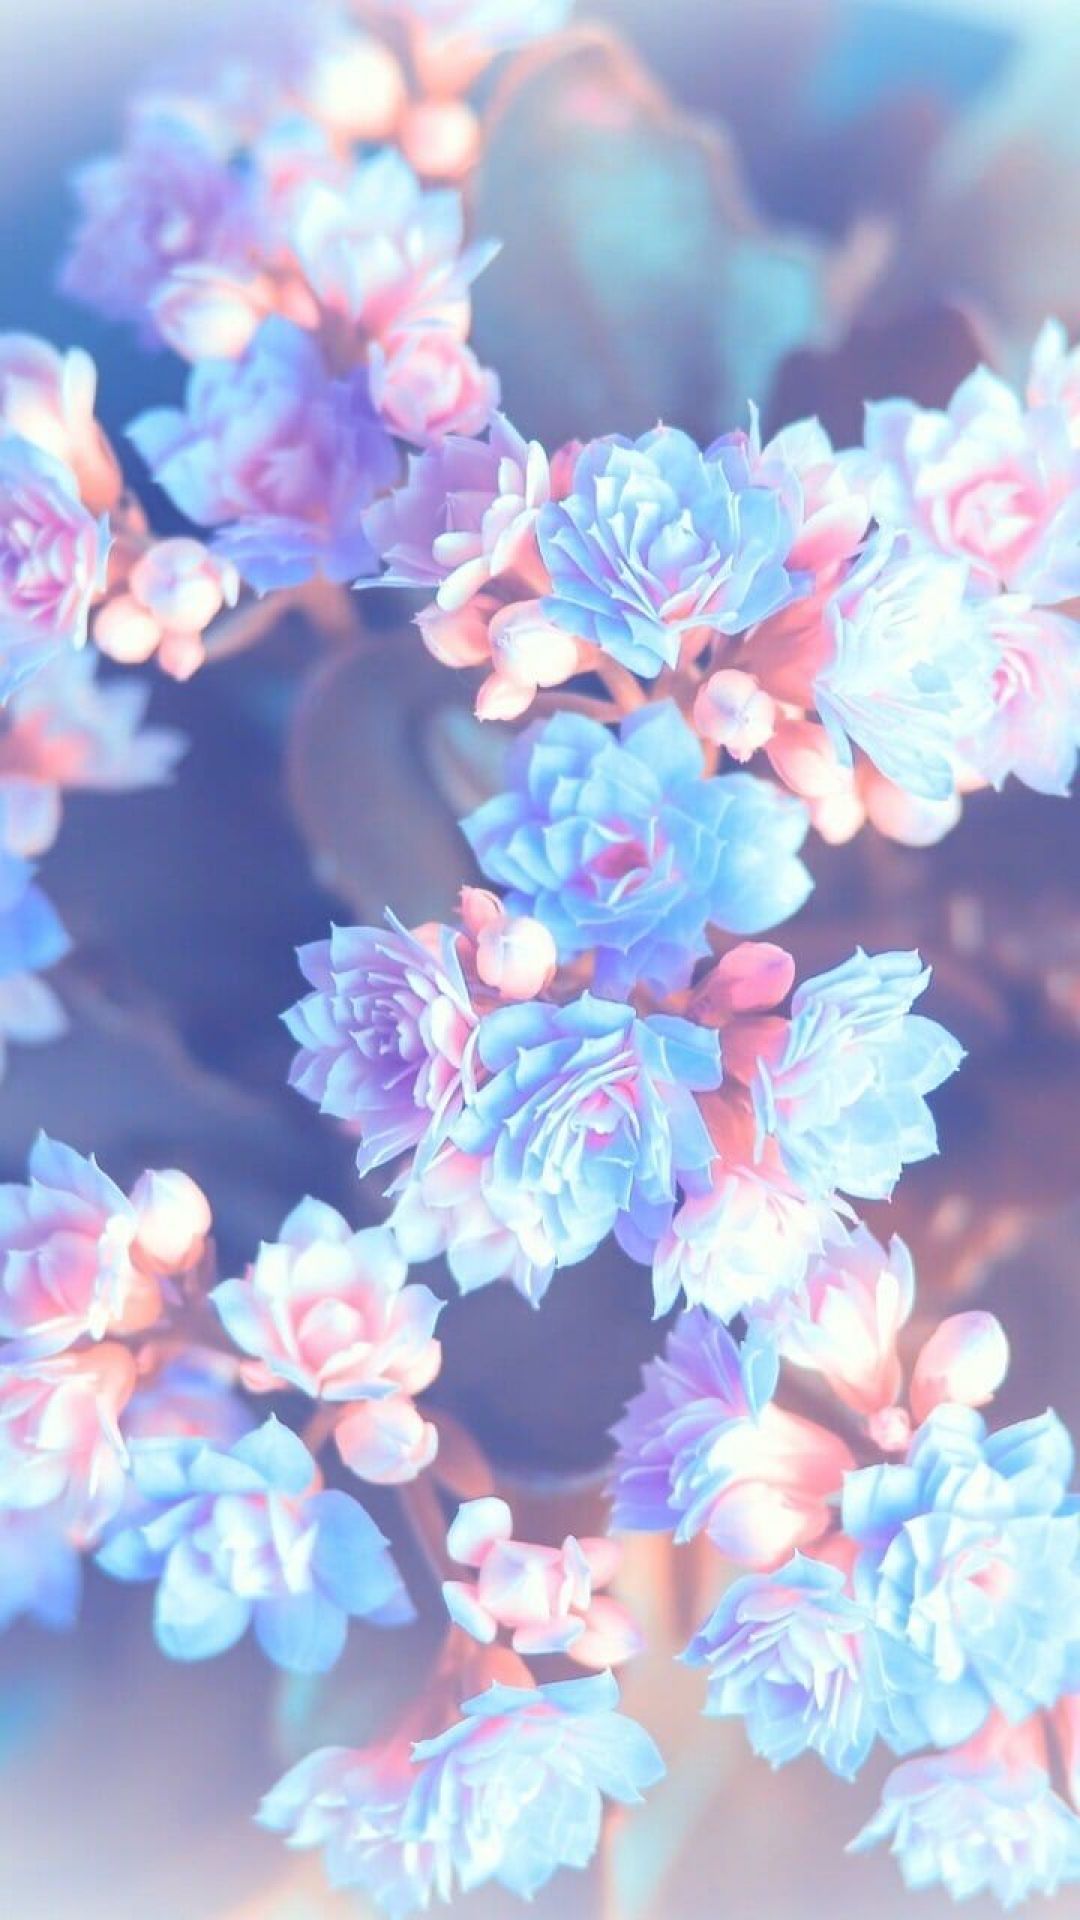 Pastel Blue Aesthetic Iphone Wallpapers